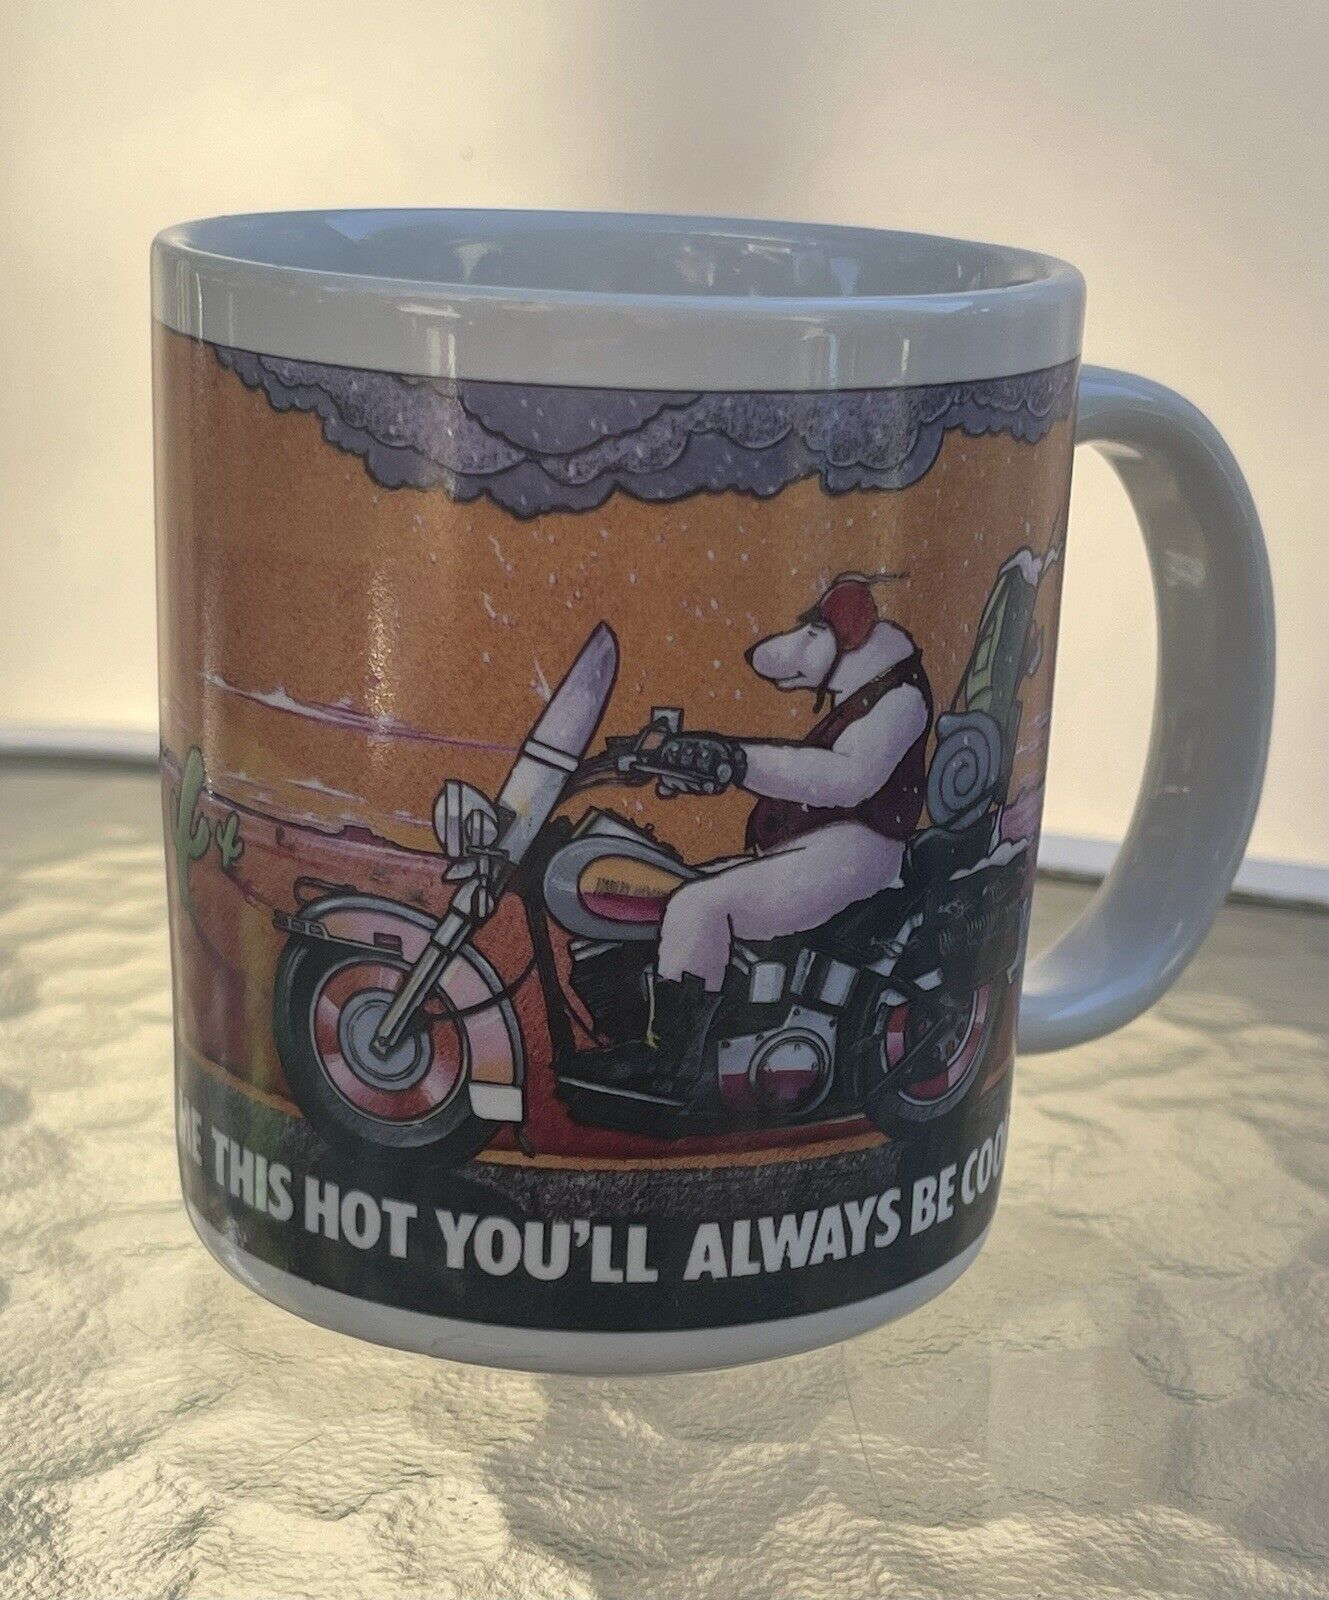 Motor Harley Davidson Cycles Mug 1989 With A Name This Hot You’ll Always Be Cool